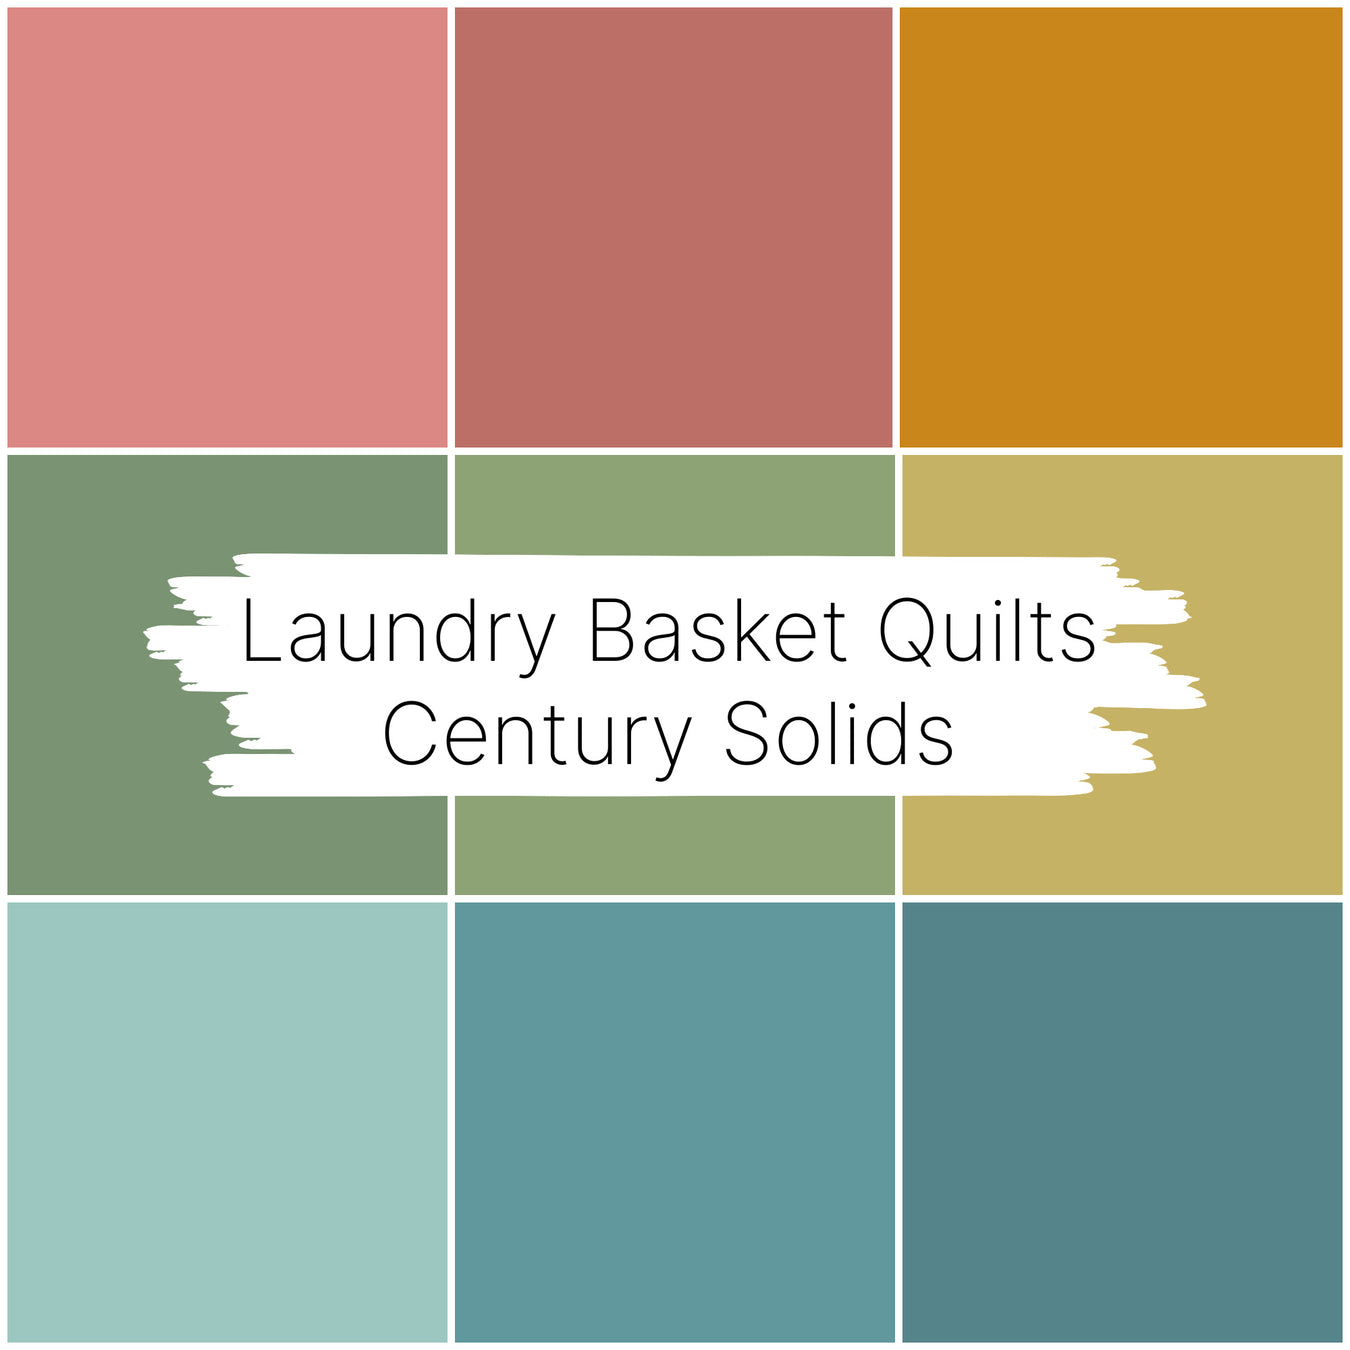 Laundry Basket Quilts Century Solids